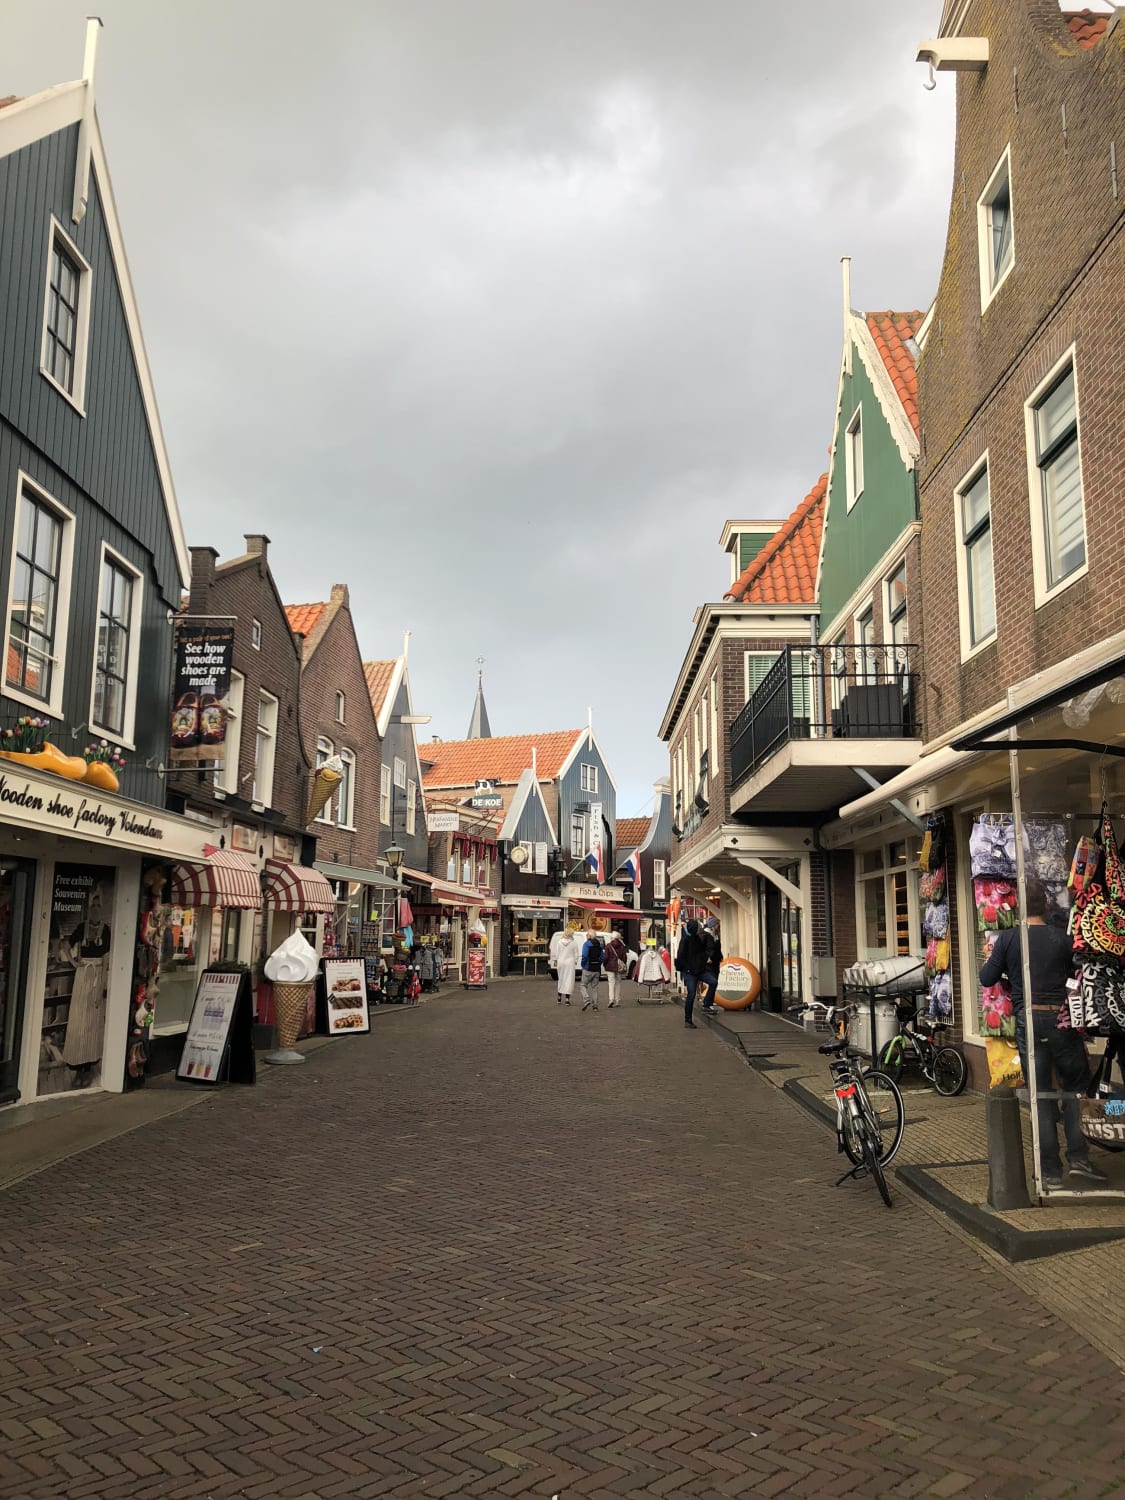 Amazing street in Holland. I do not remember the exact name of the city, but it is an hour's drive from Amsterdam and its very beautiful😍